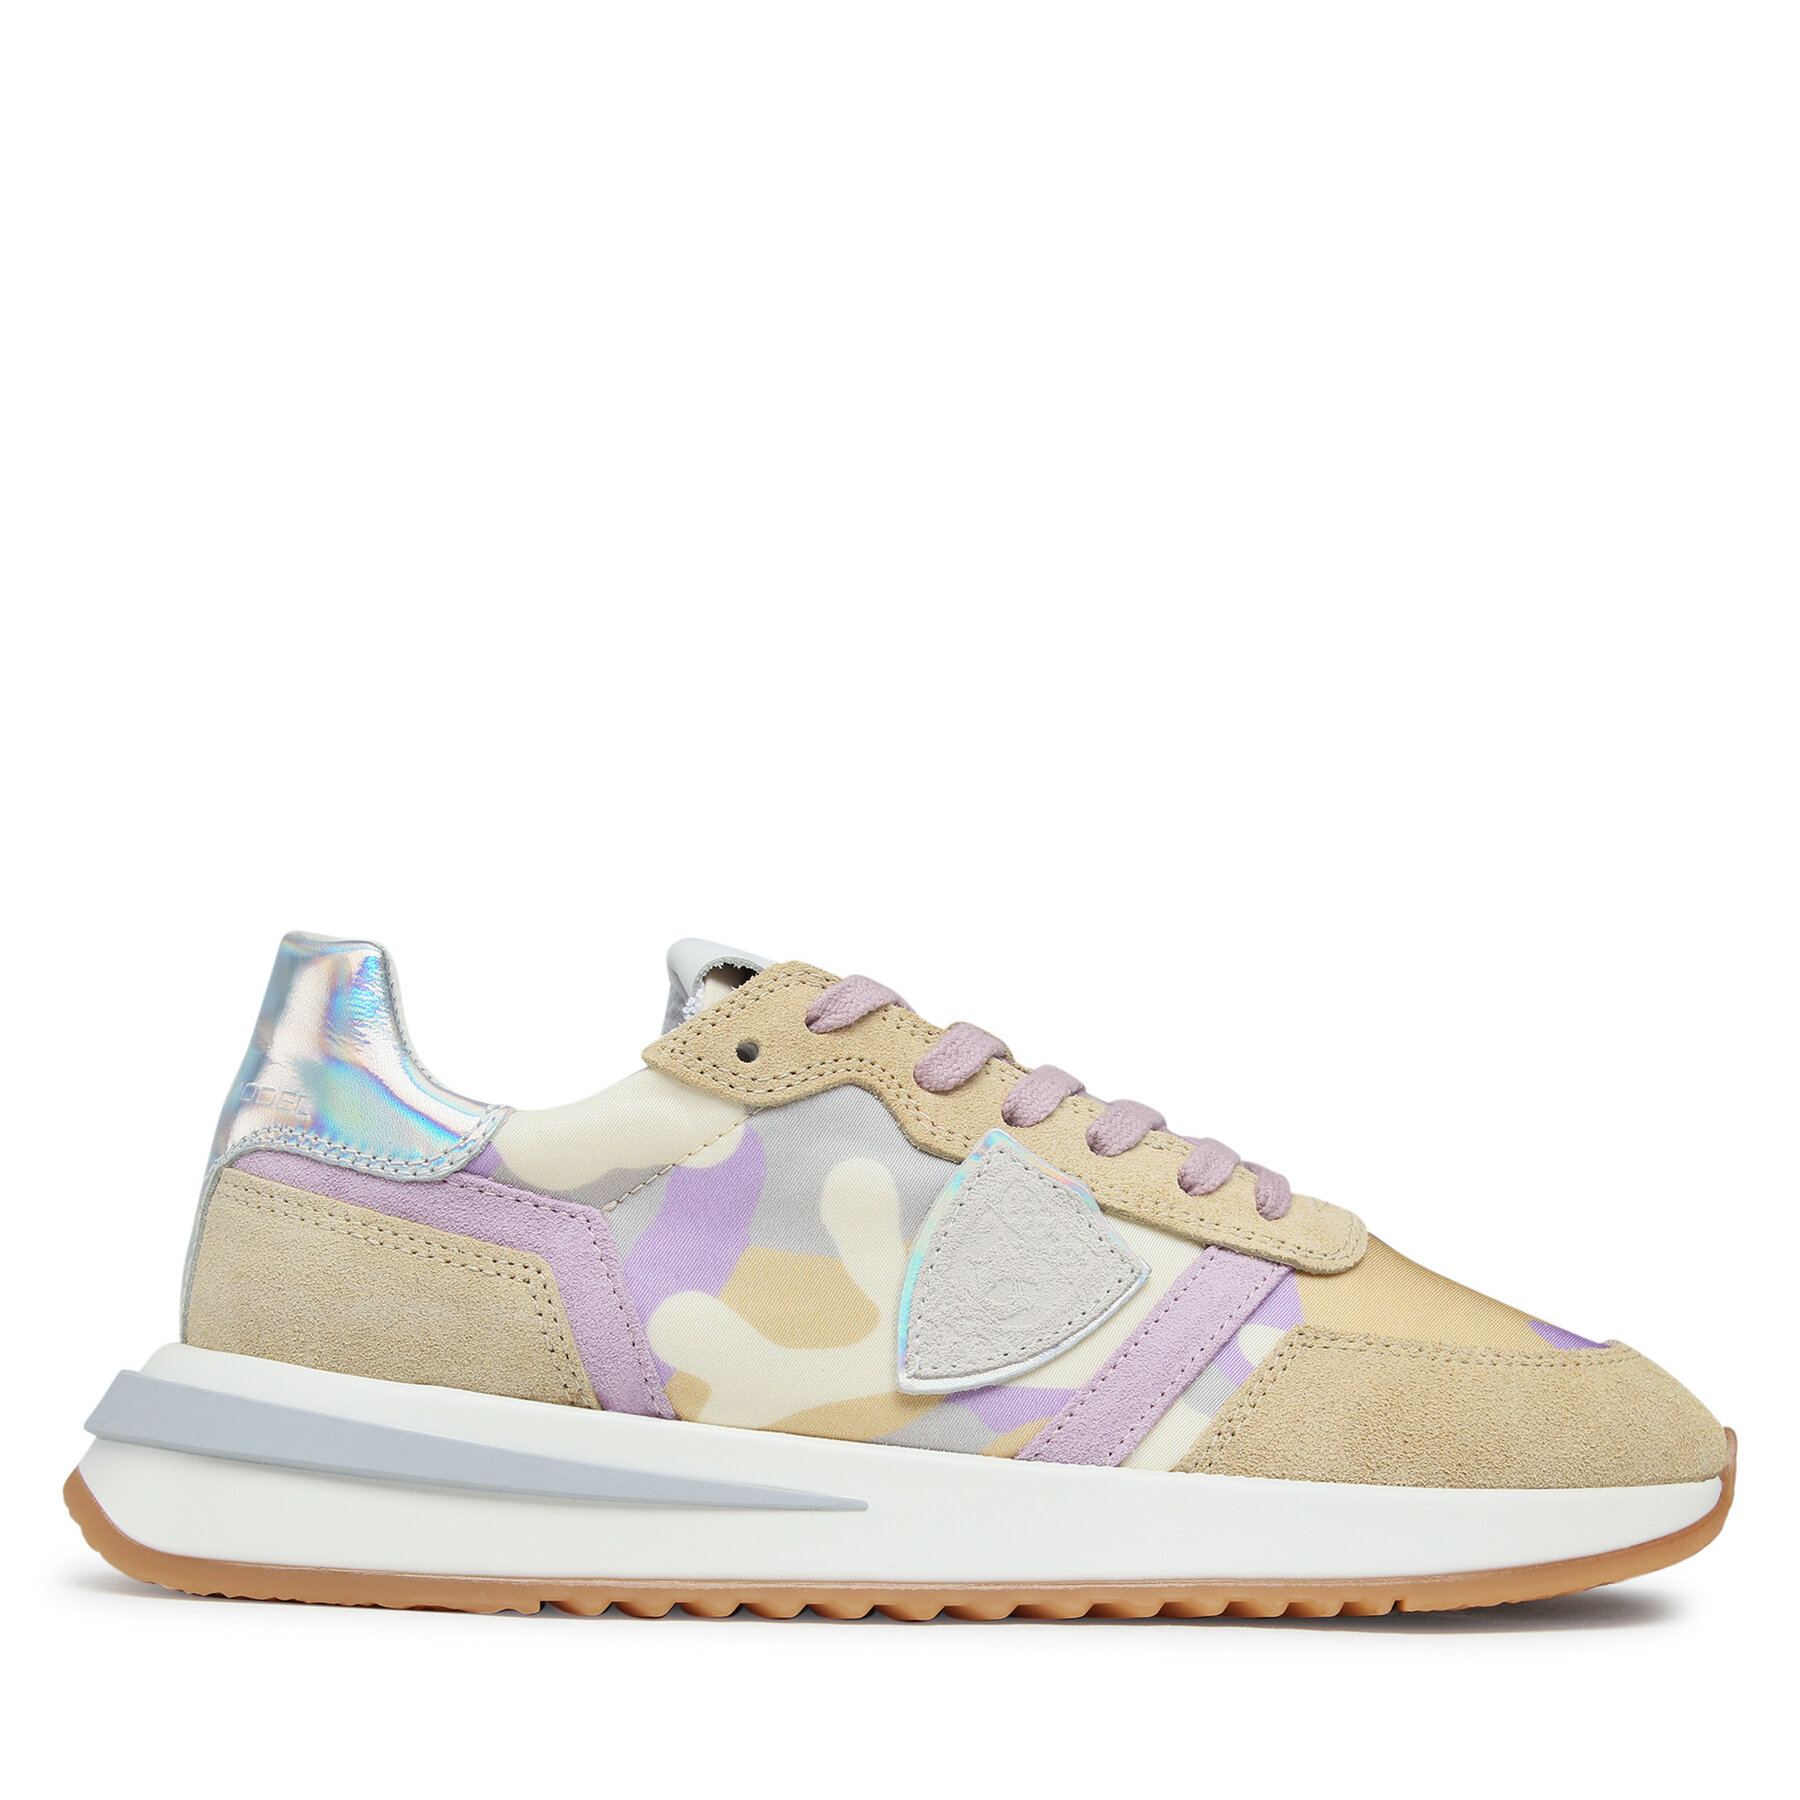 Sneakers Philippe Model Tropez 2.1 TYLD CP24 Camou/Sable' Violet von Philippe Model